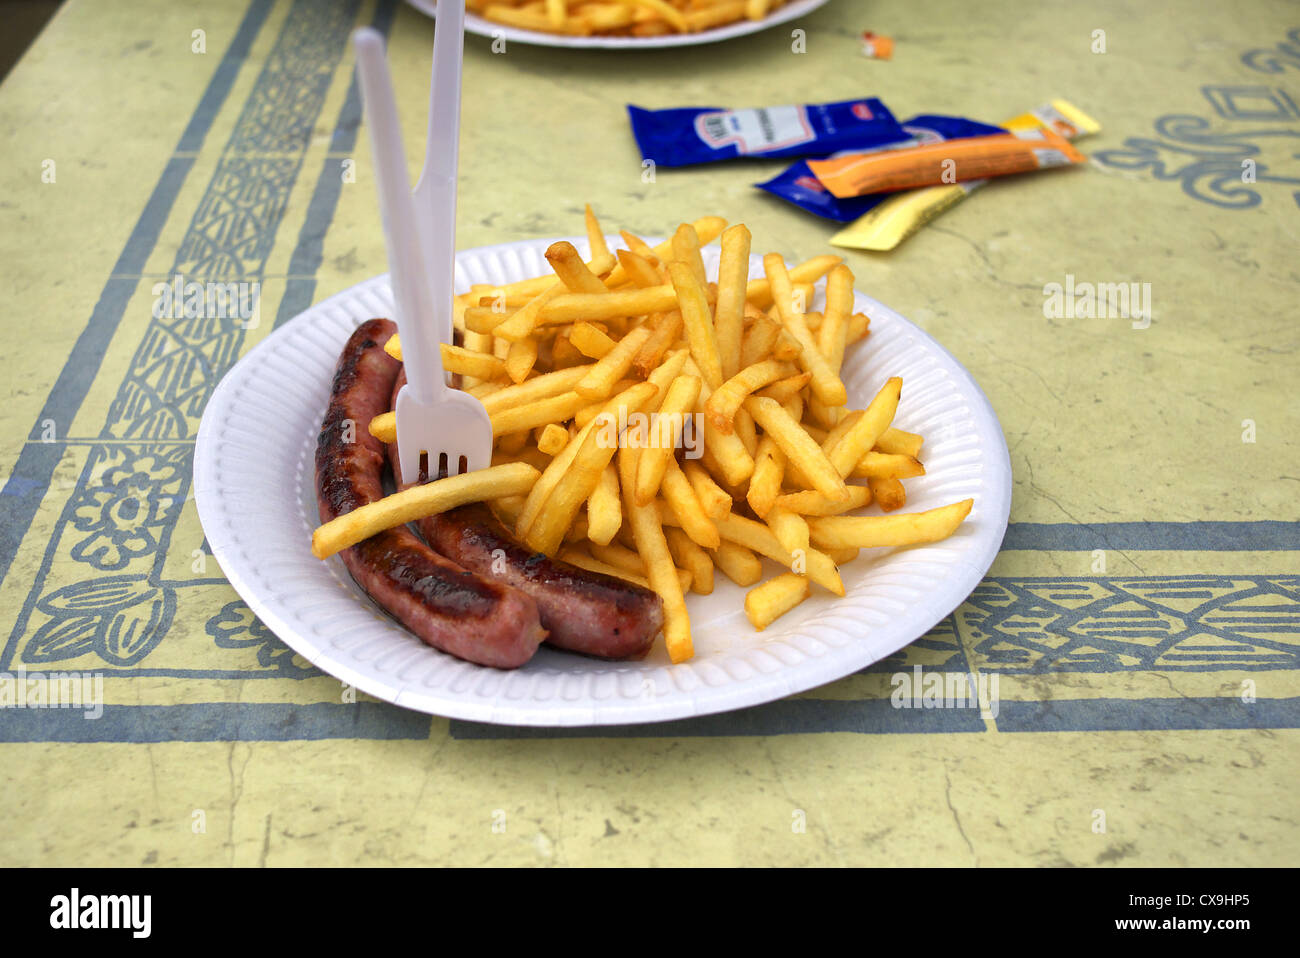 Sausages and chips on a paper plate with plastic cutlery, France. Stock Photo